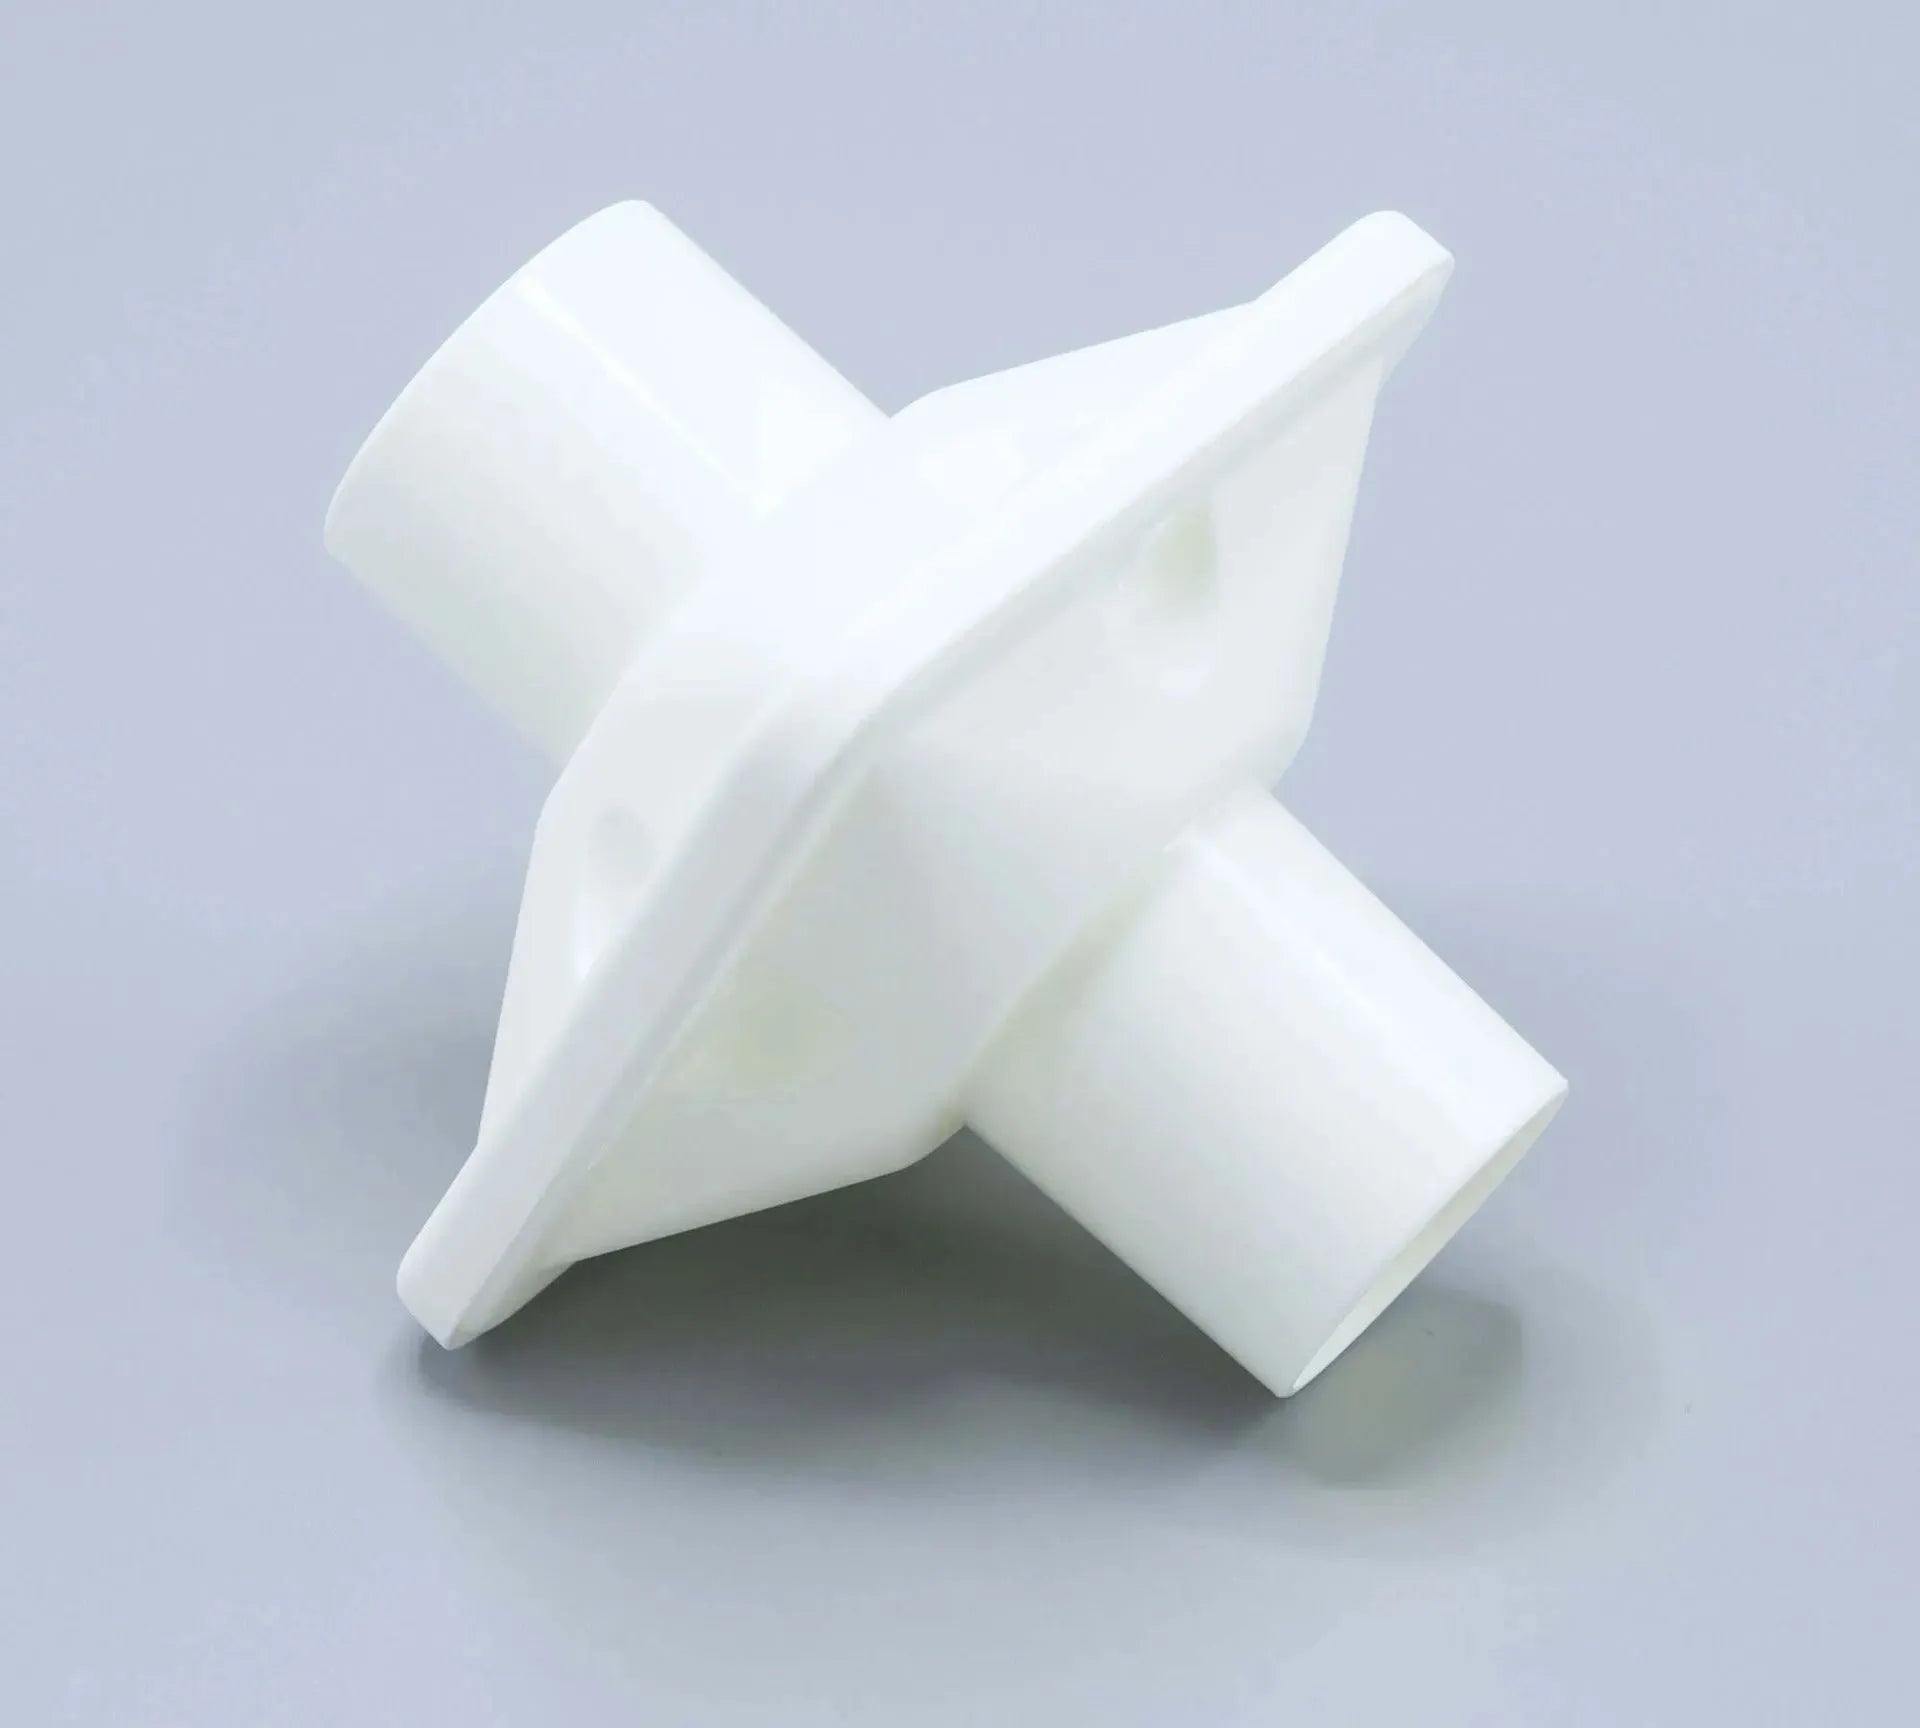 The bacterial/viral filter mouthpiece shown is round in shape, and white in color..